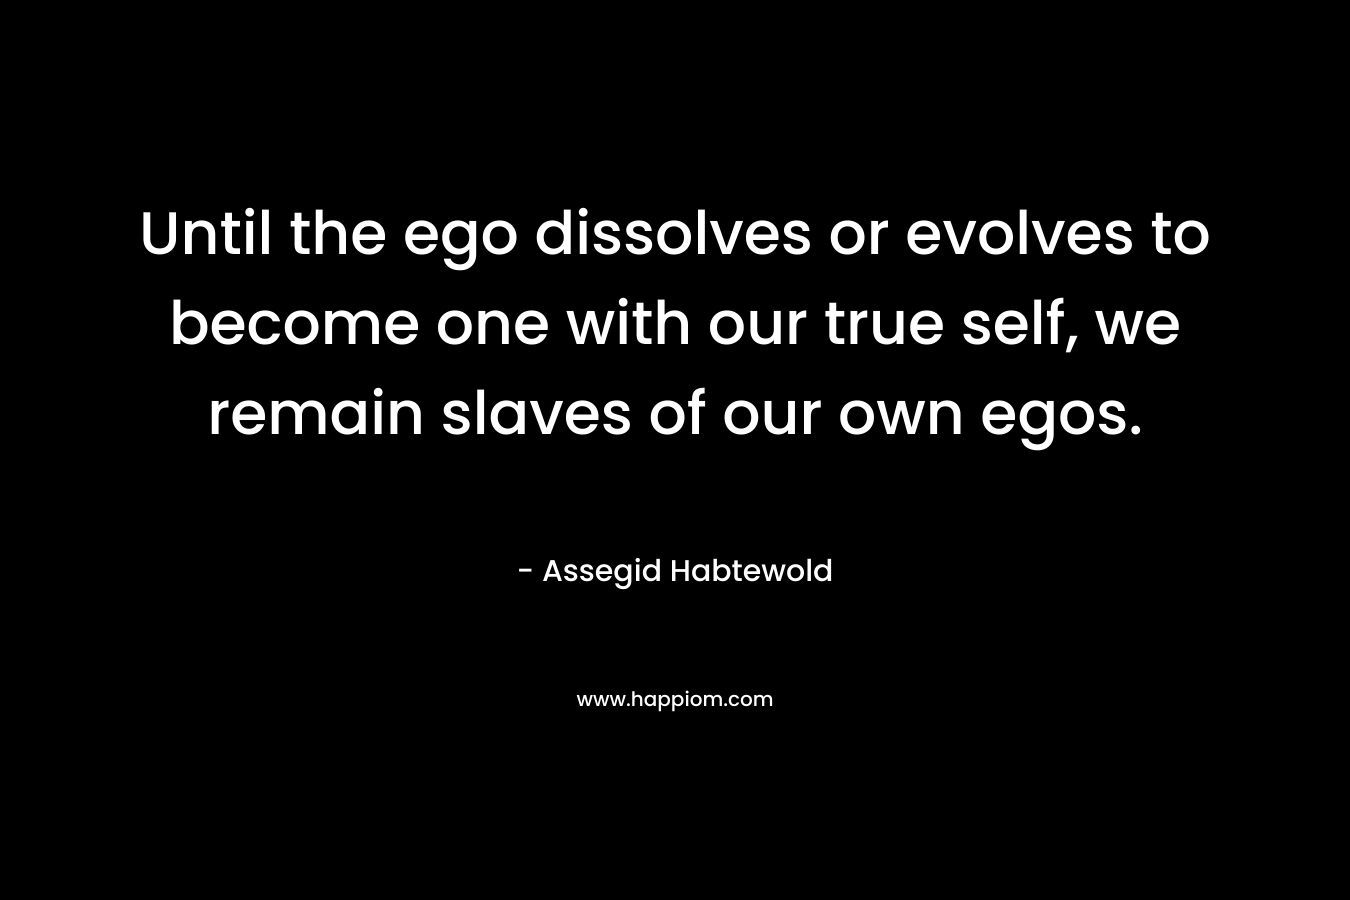 Until the ego dissolves or evolves to become one with our true self, we remain slaves of our own egos. – Assegid Habtewold